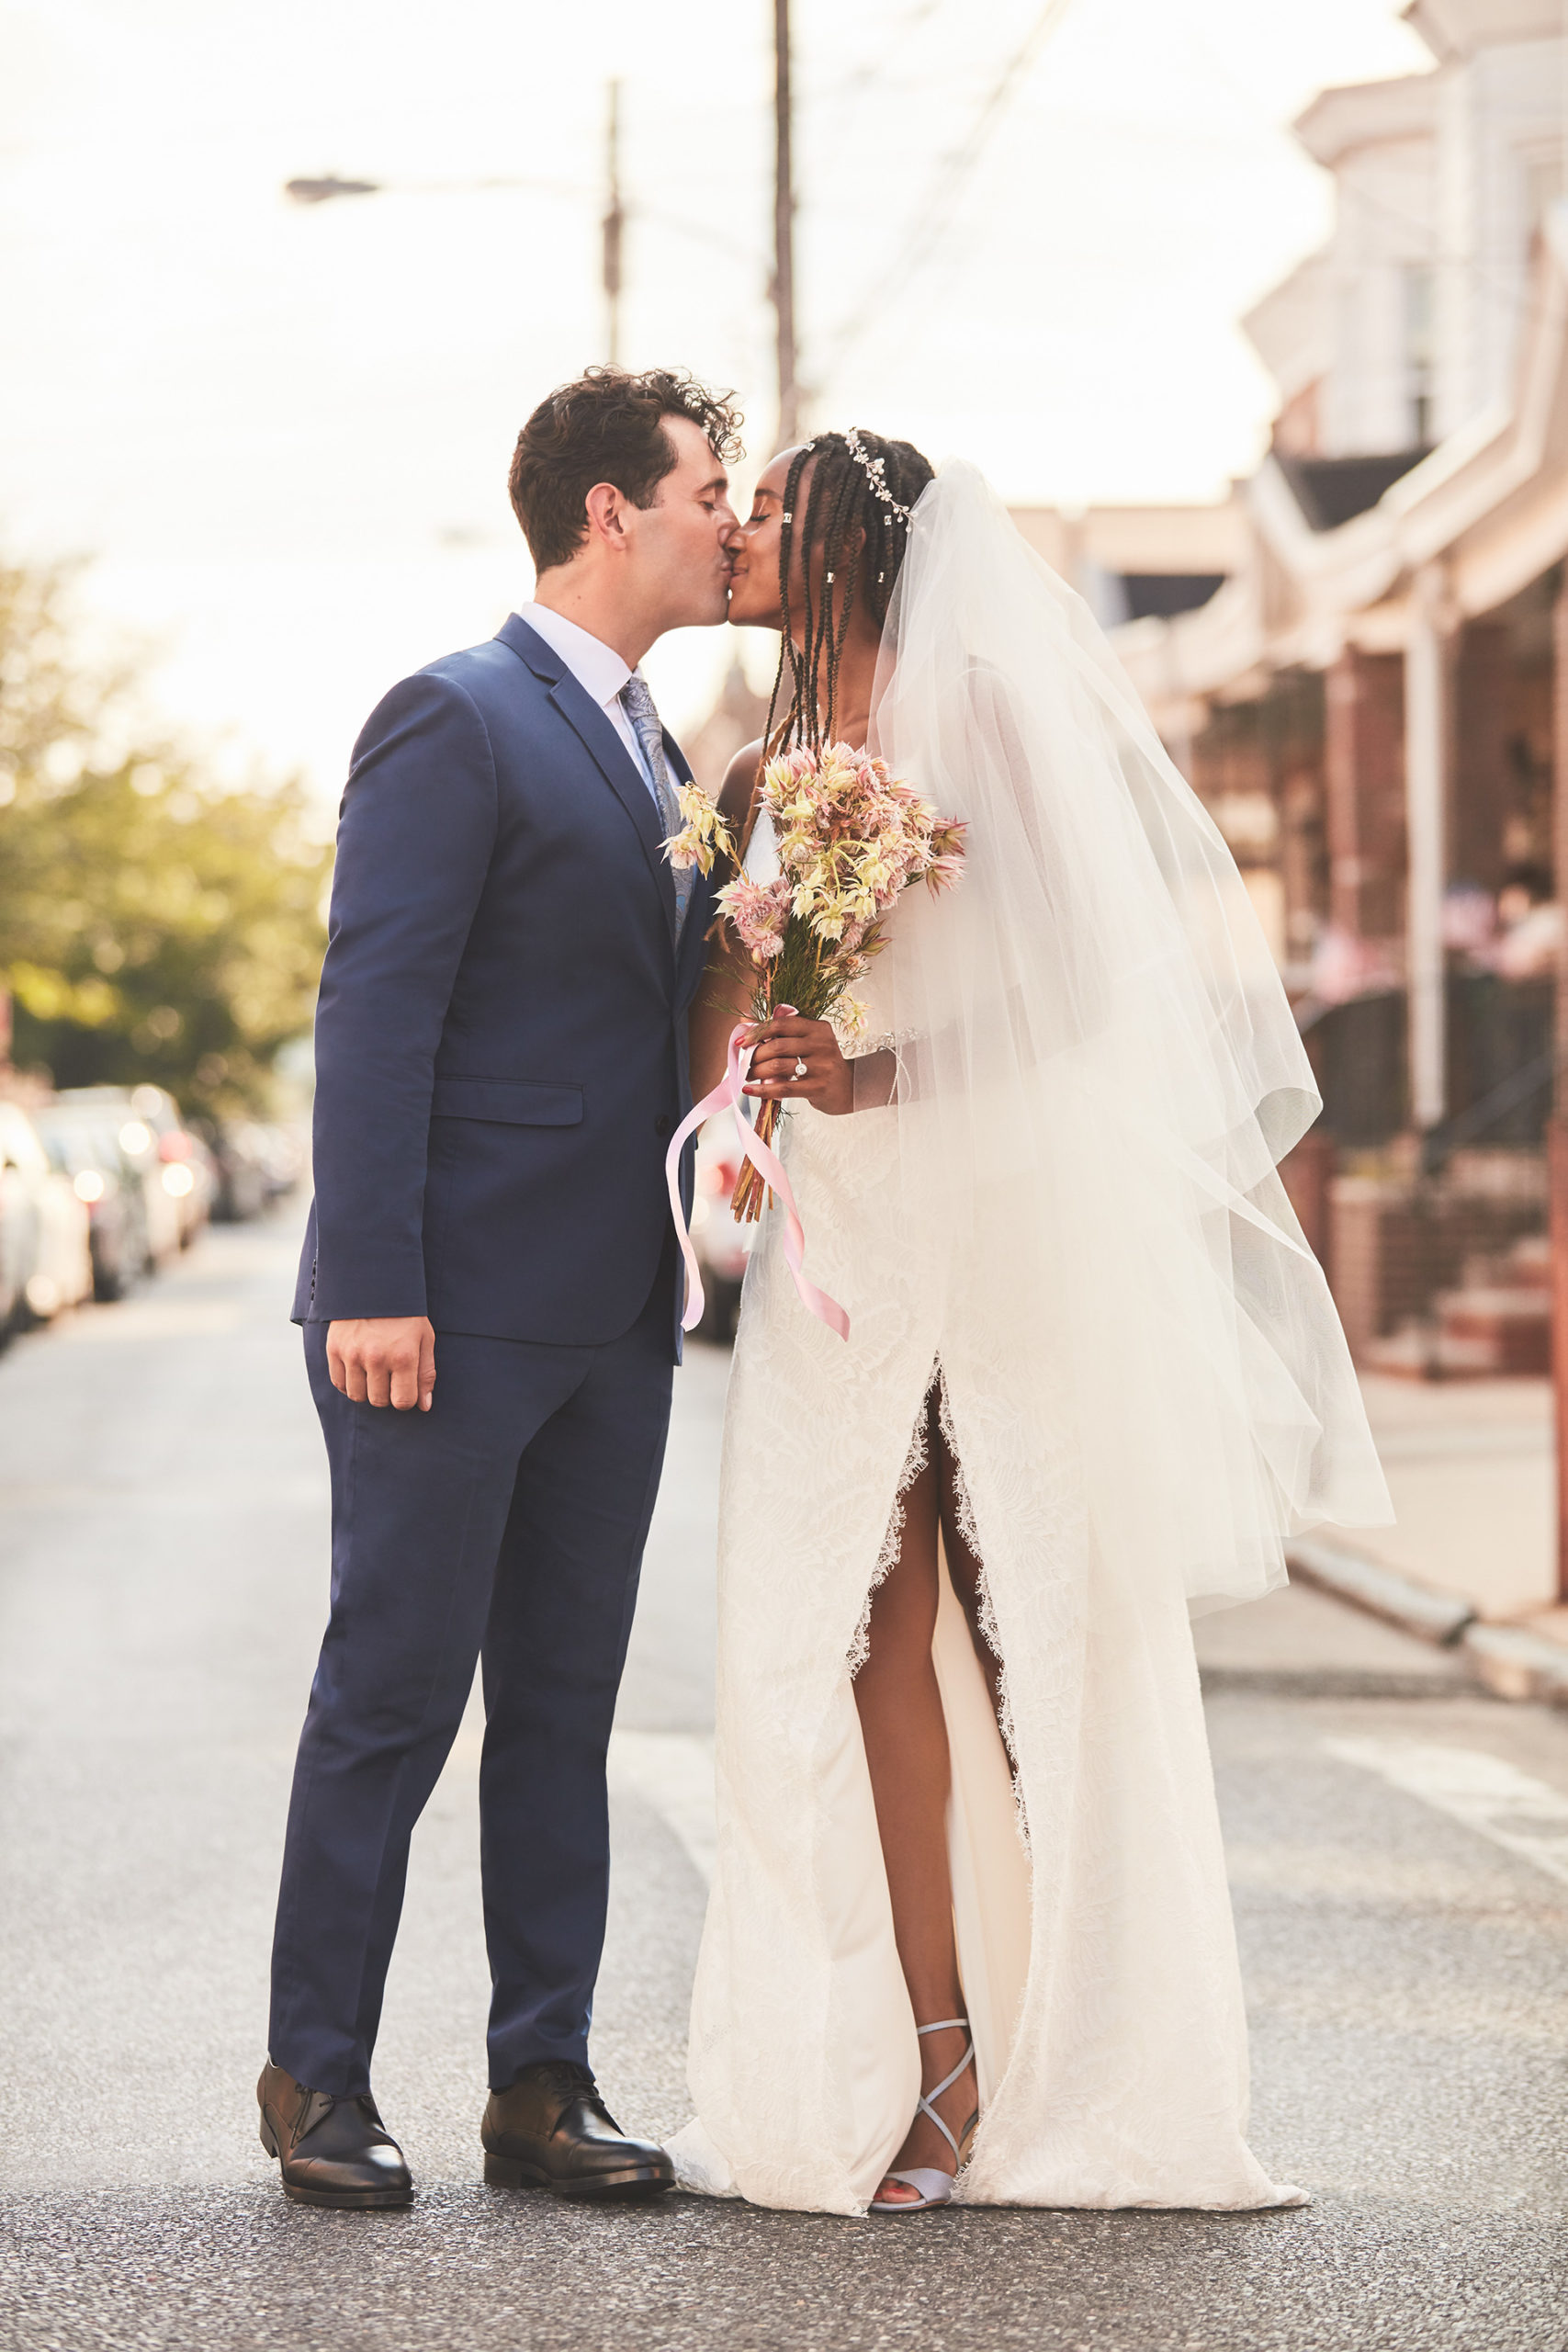 Bride and Groom kissing in the city streets